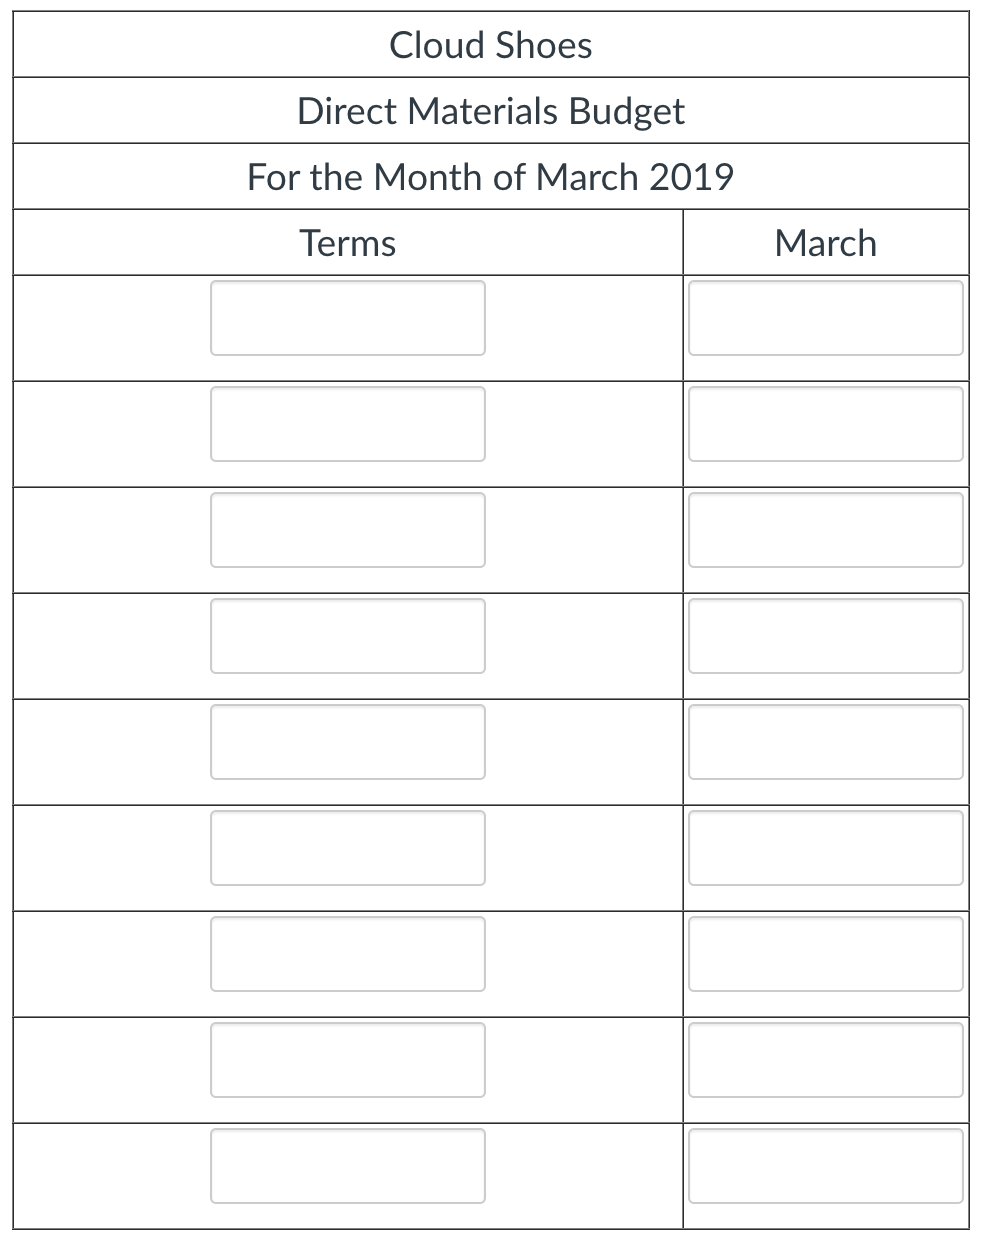 Cloud Shoes
Direct Materials Budget
For the Month of March 2019
Terms
March